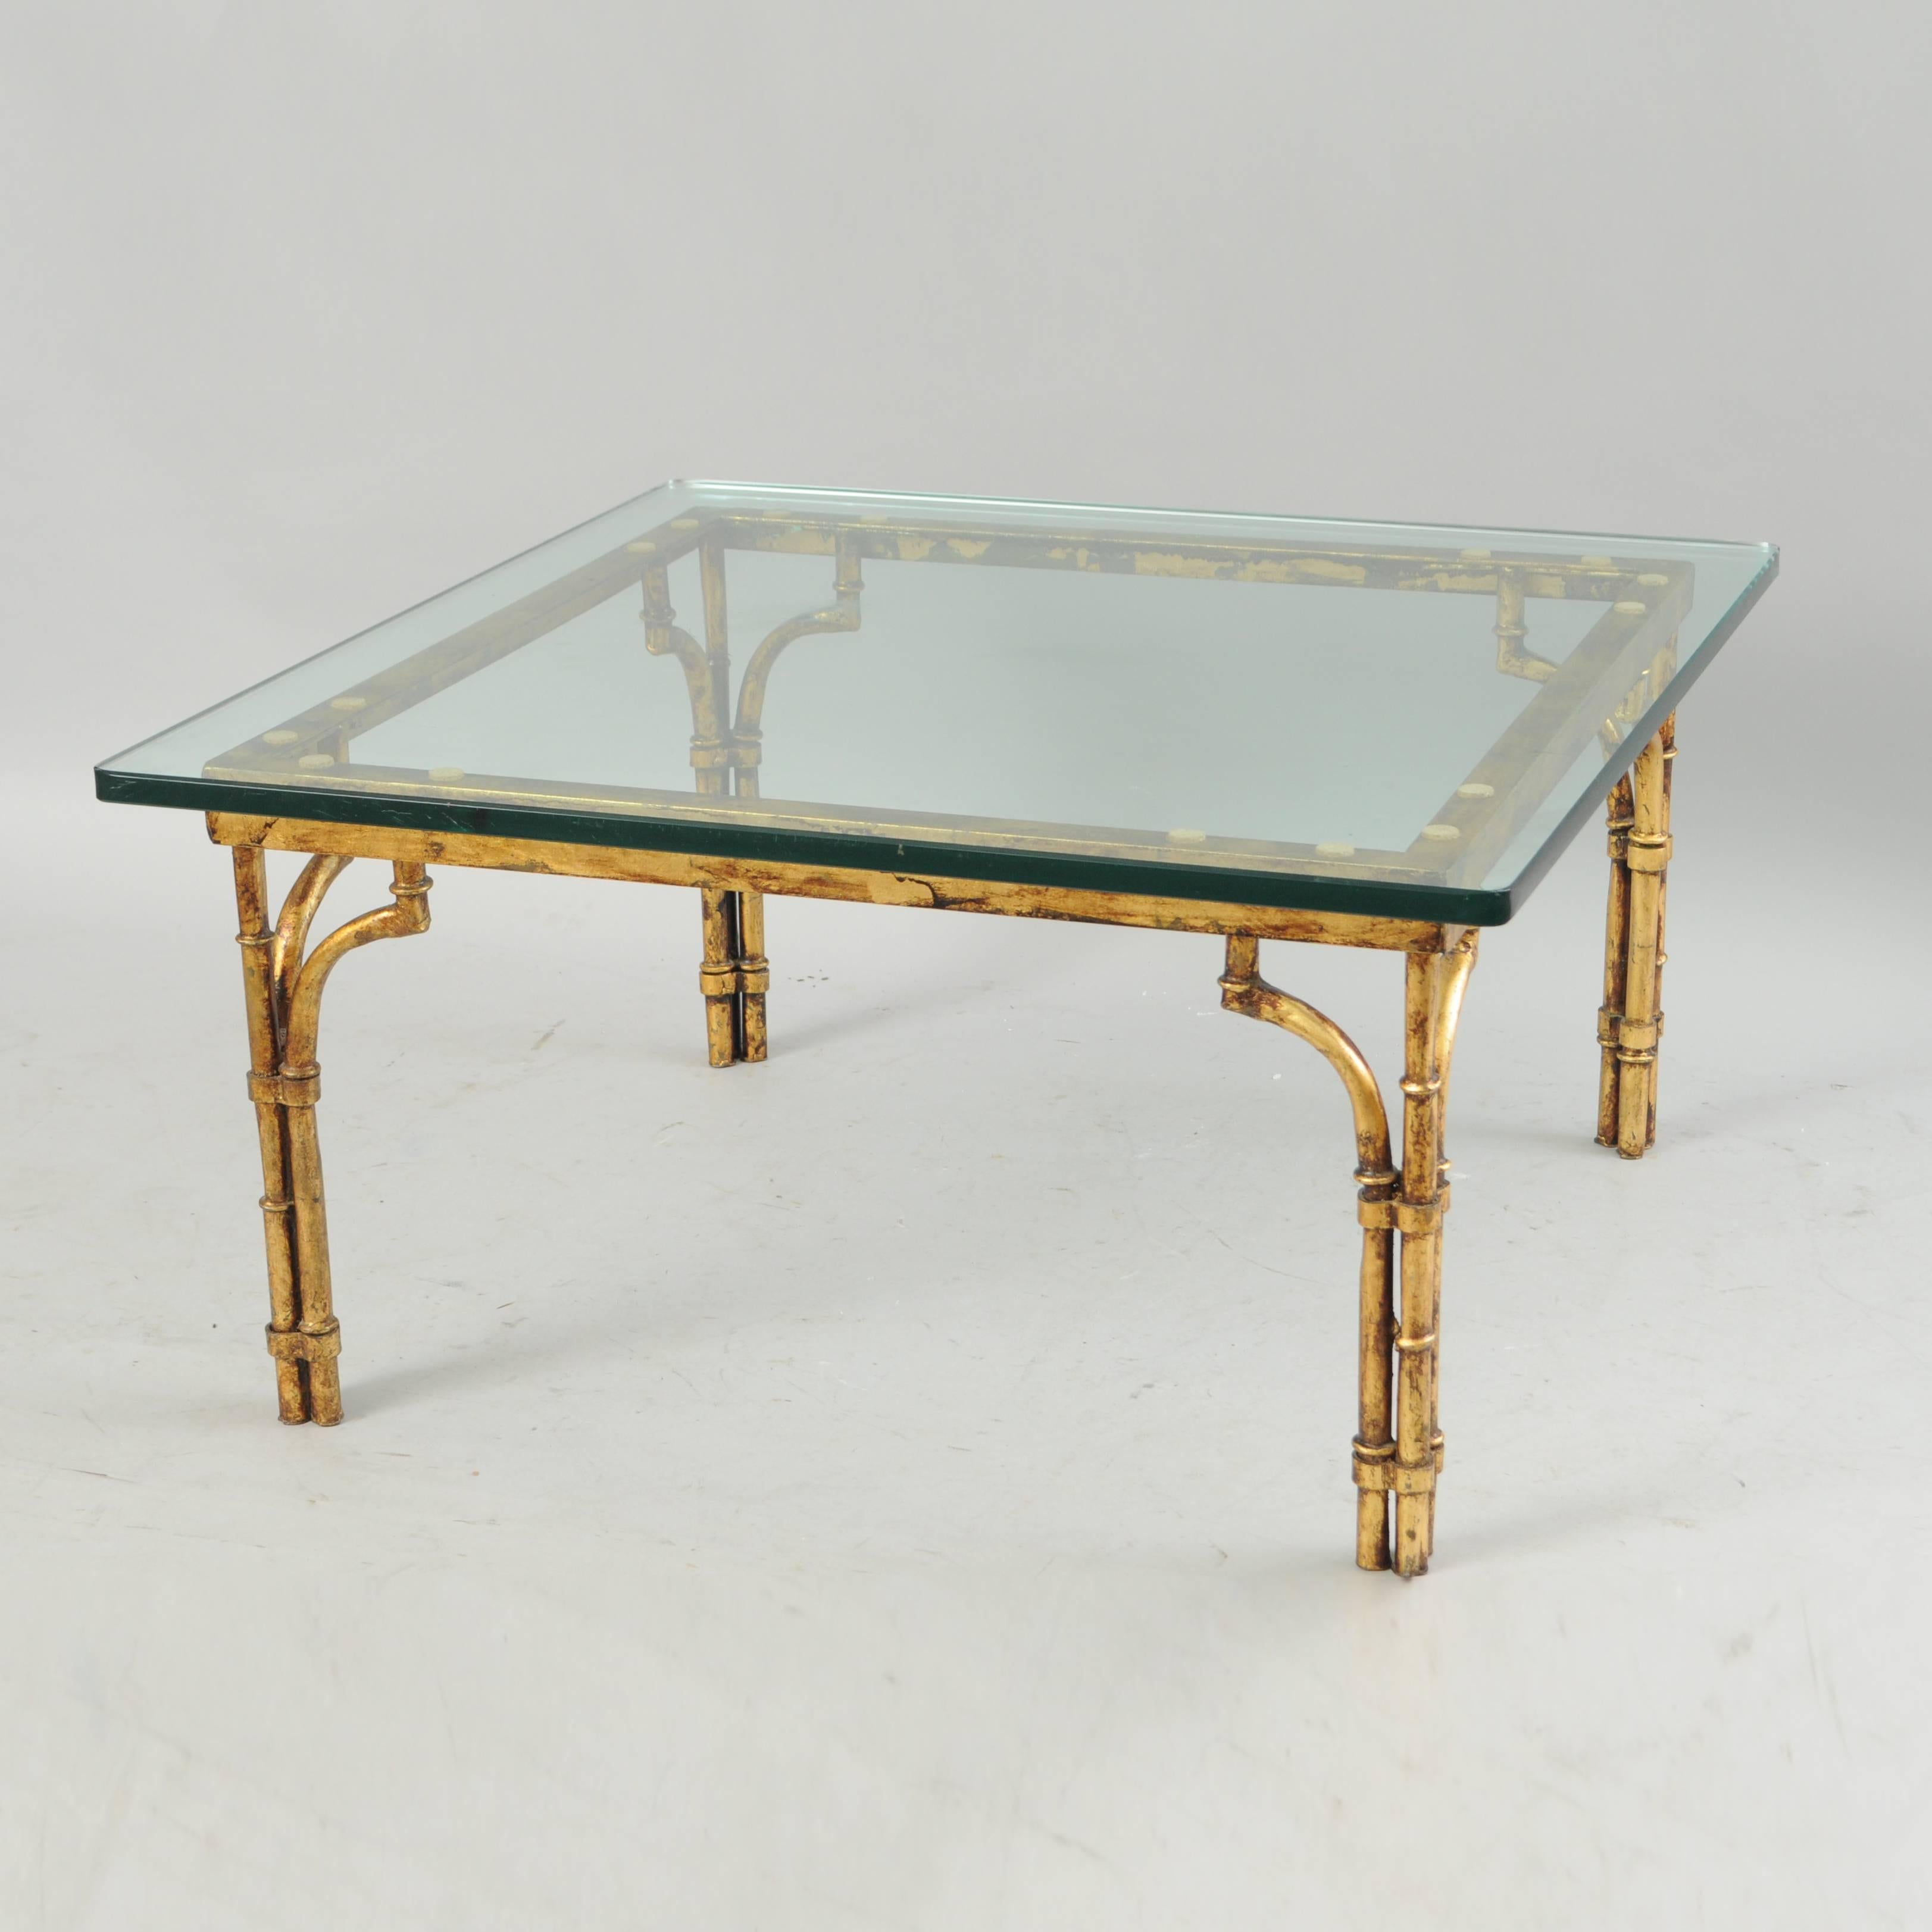 Italian Gold Gilt Iron and Glass Faux Bamboo Metal Square Coffee Table Vintage 1